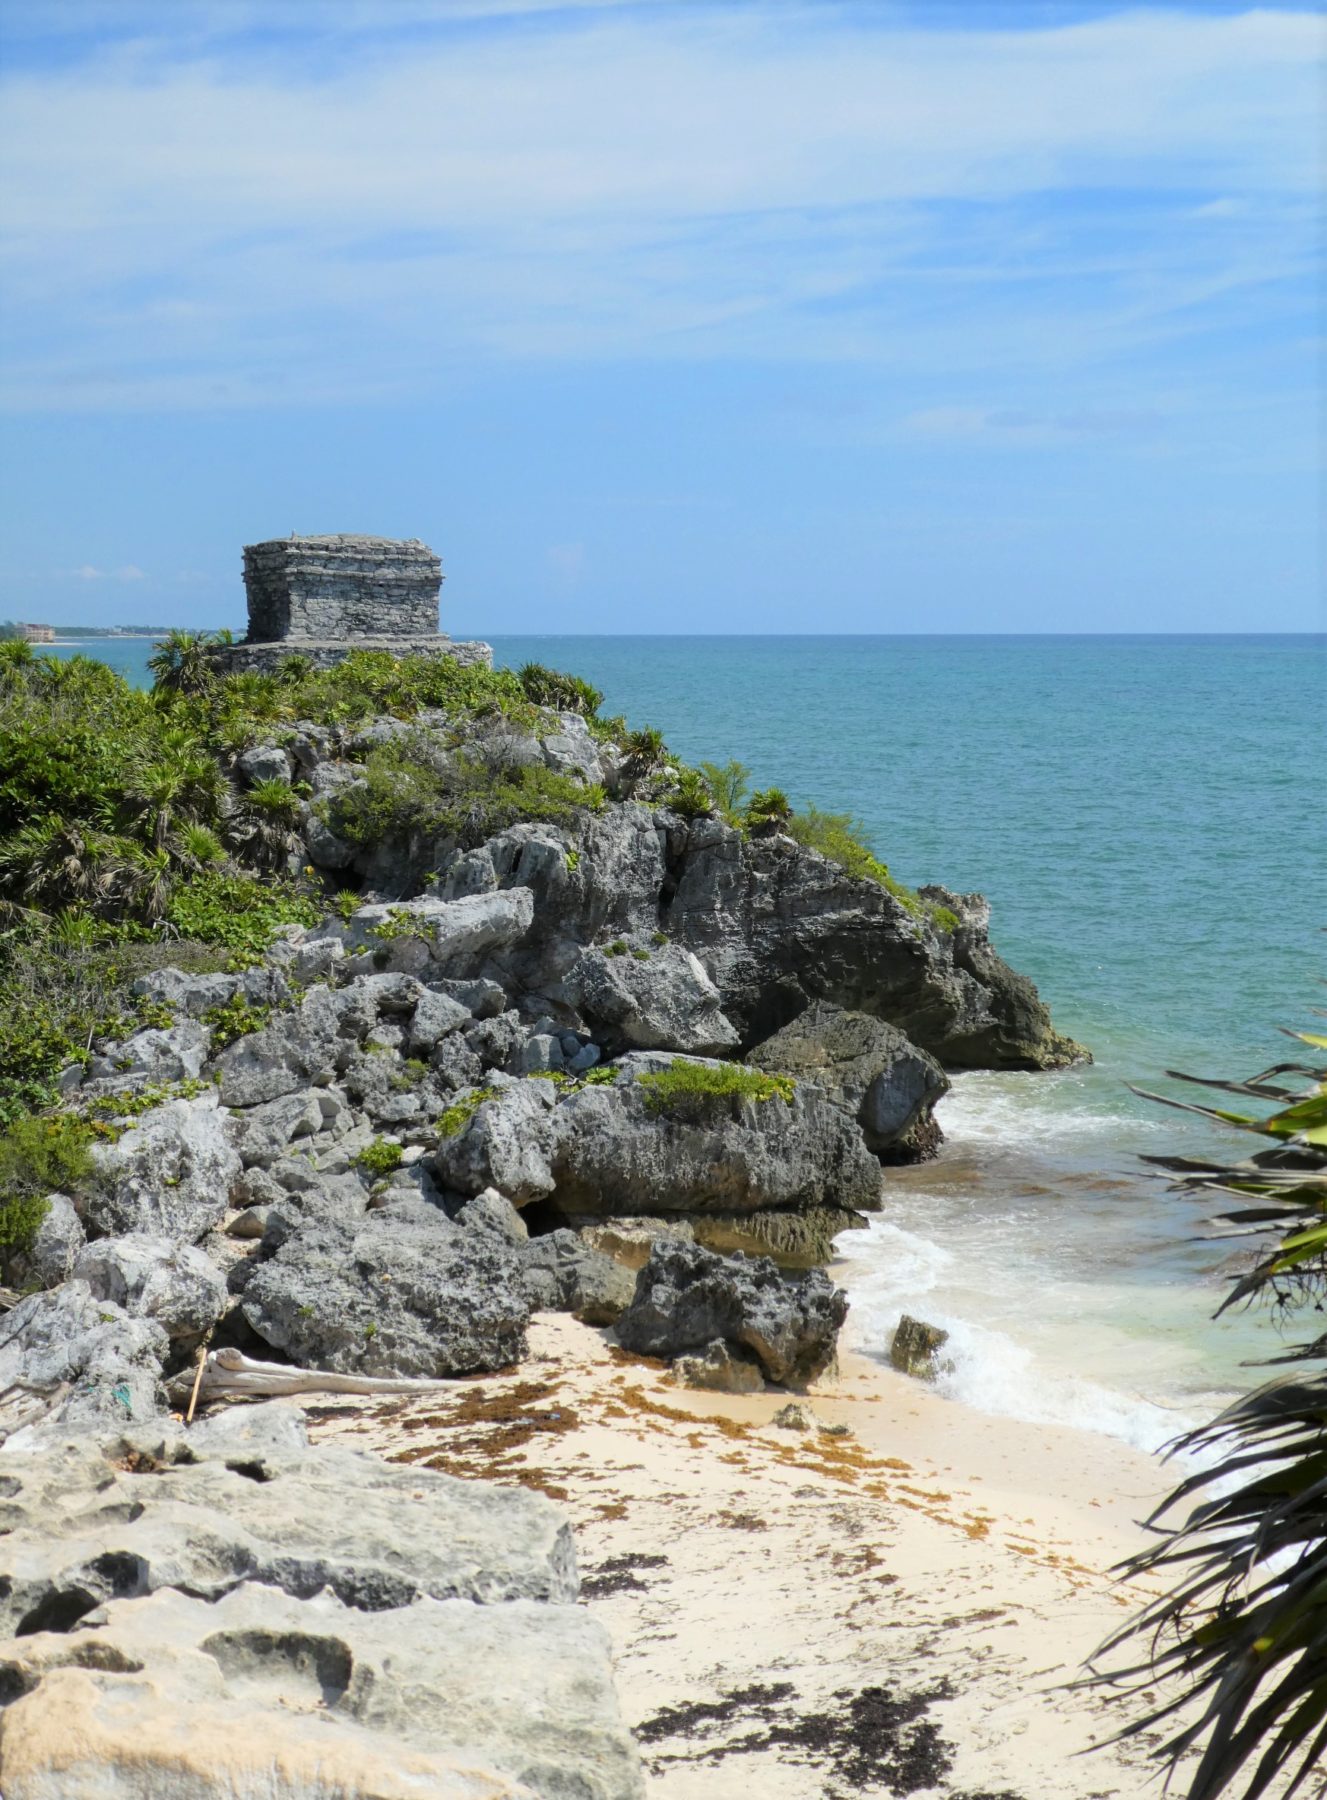 Mexico Tulum Ruins and Beach by hesaidorshesaid